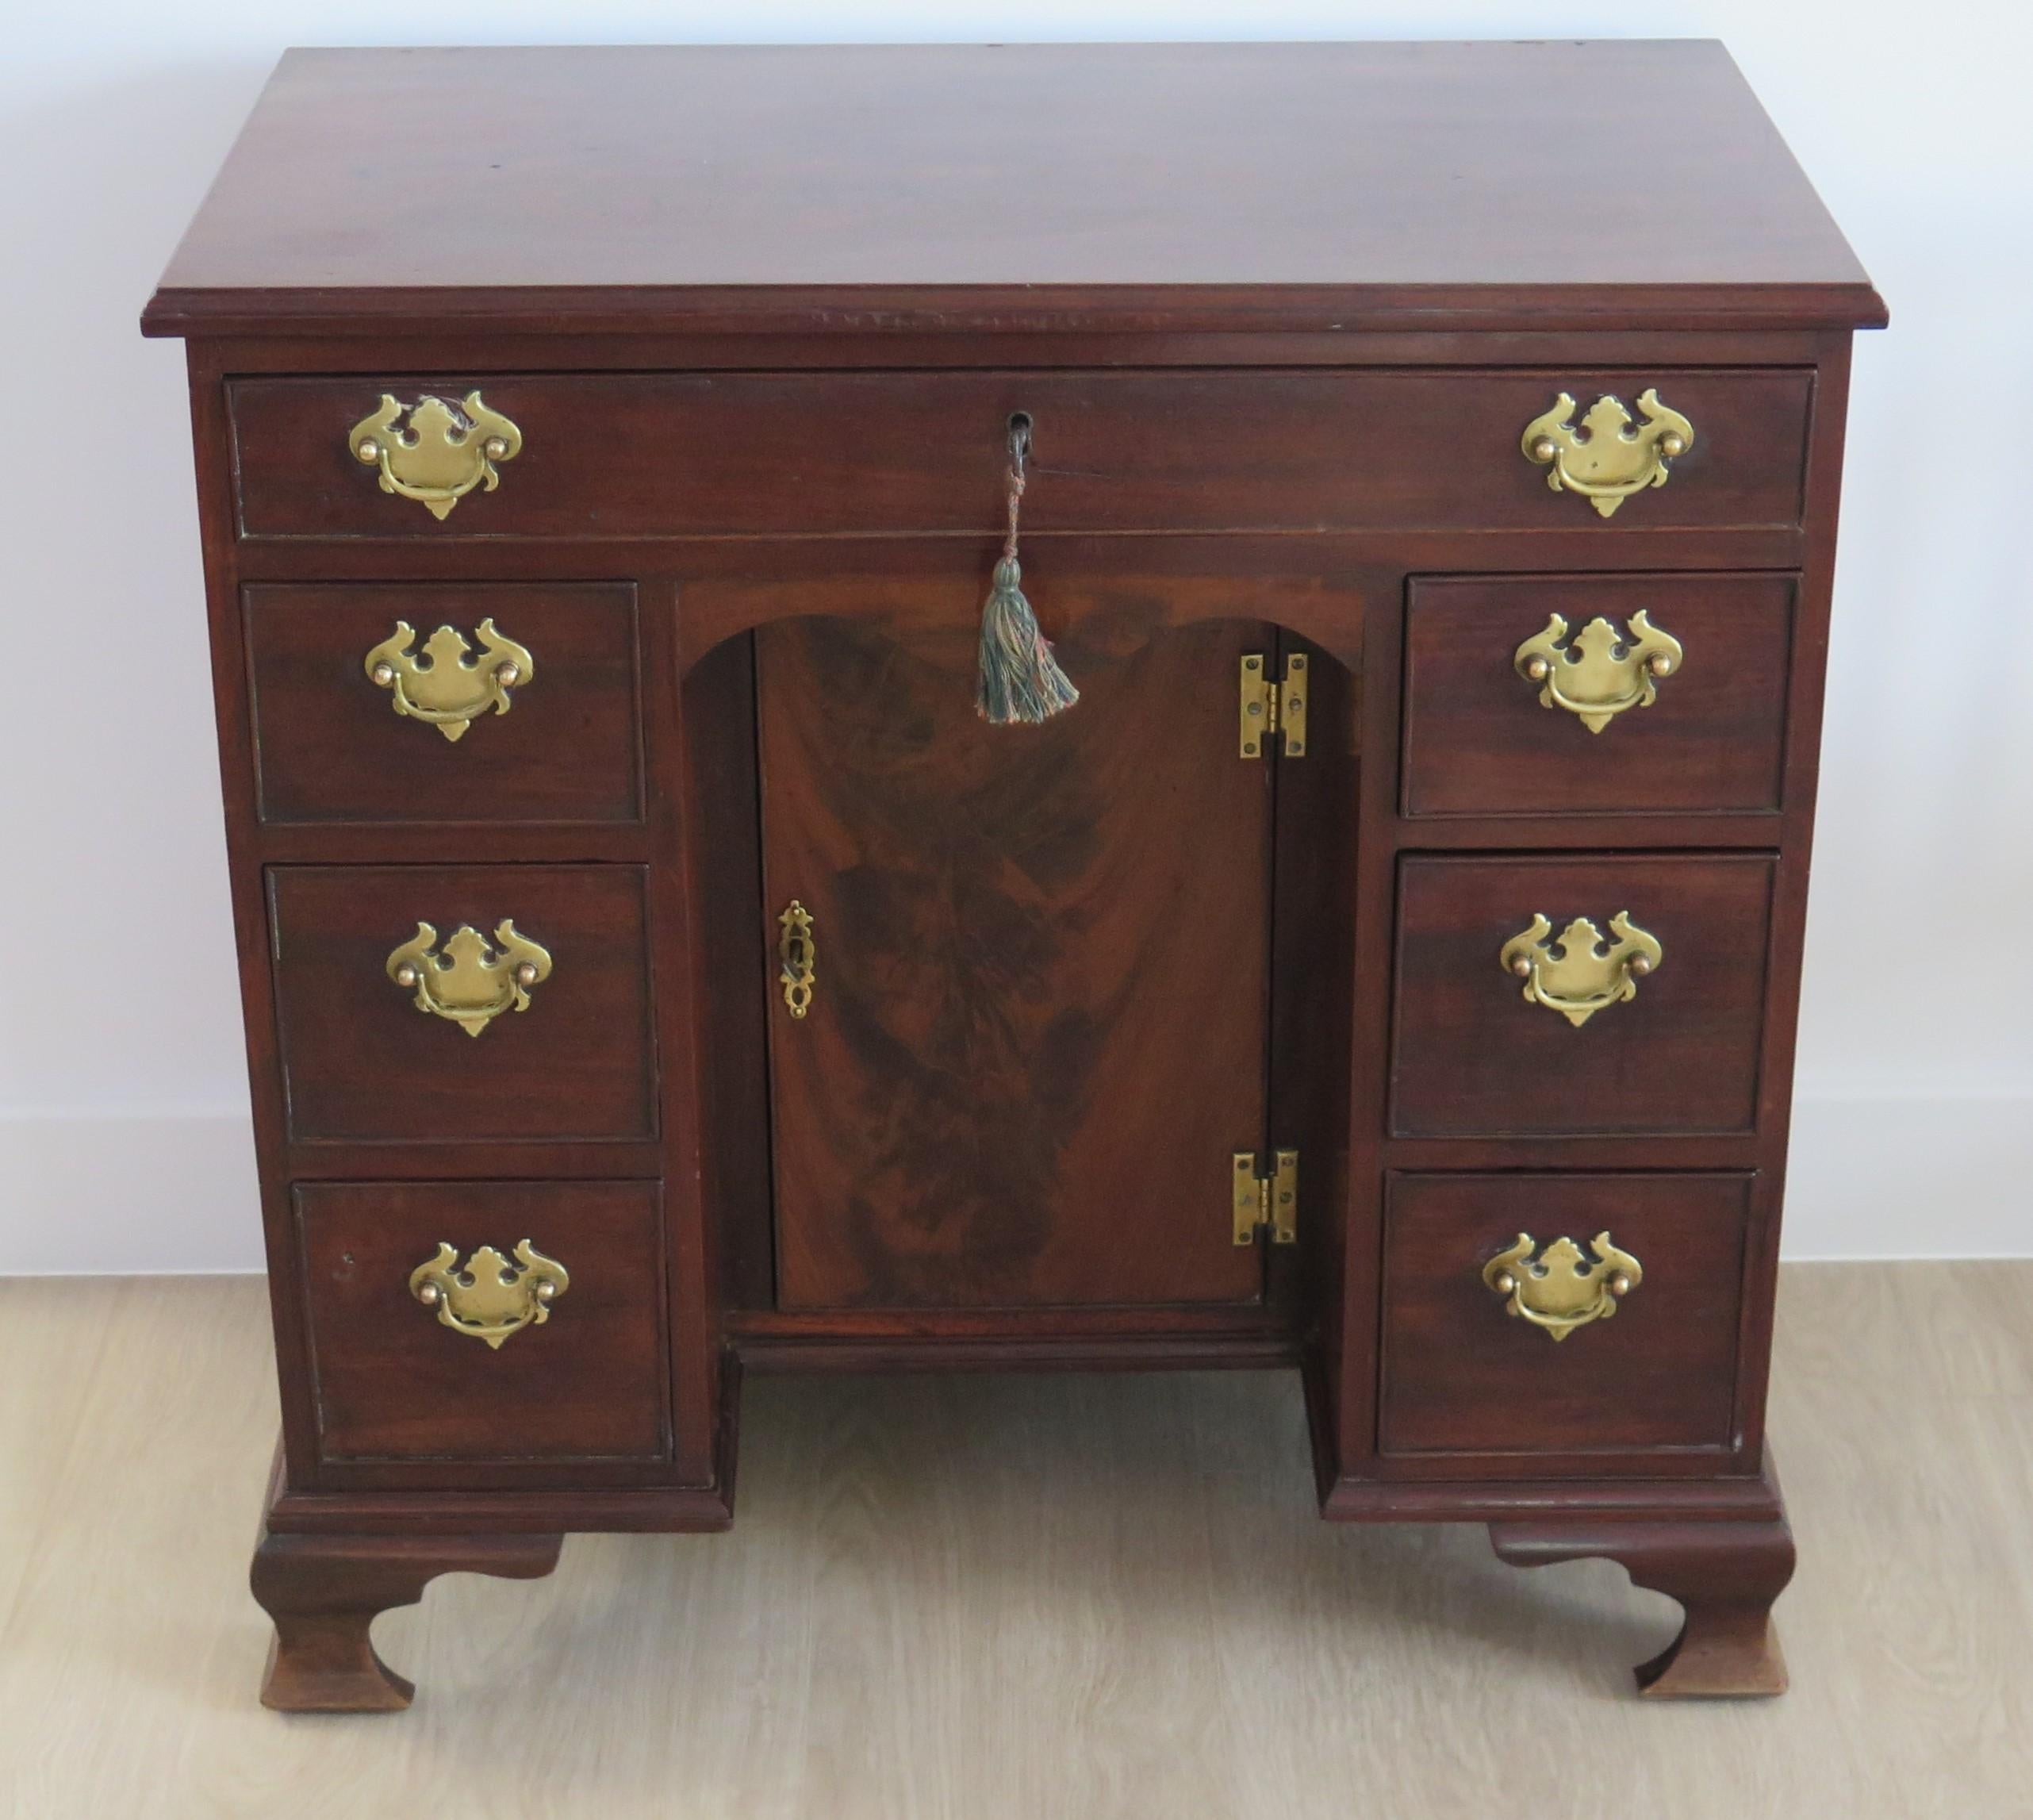 This is a fine original antique kneehole desk or dressing table from the mid-18th century, thought to have the provenance of being part of the estate of Sandford Park, a listed country house in Oxfordshire.

A very useful piece for upstairs or